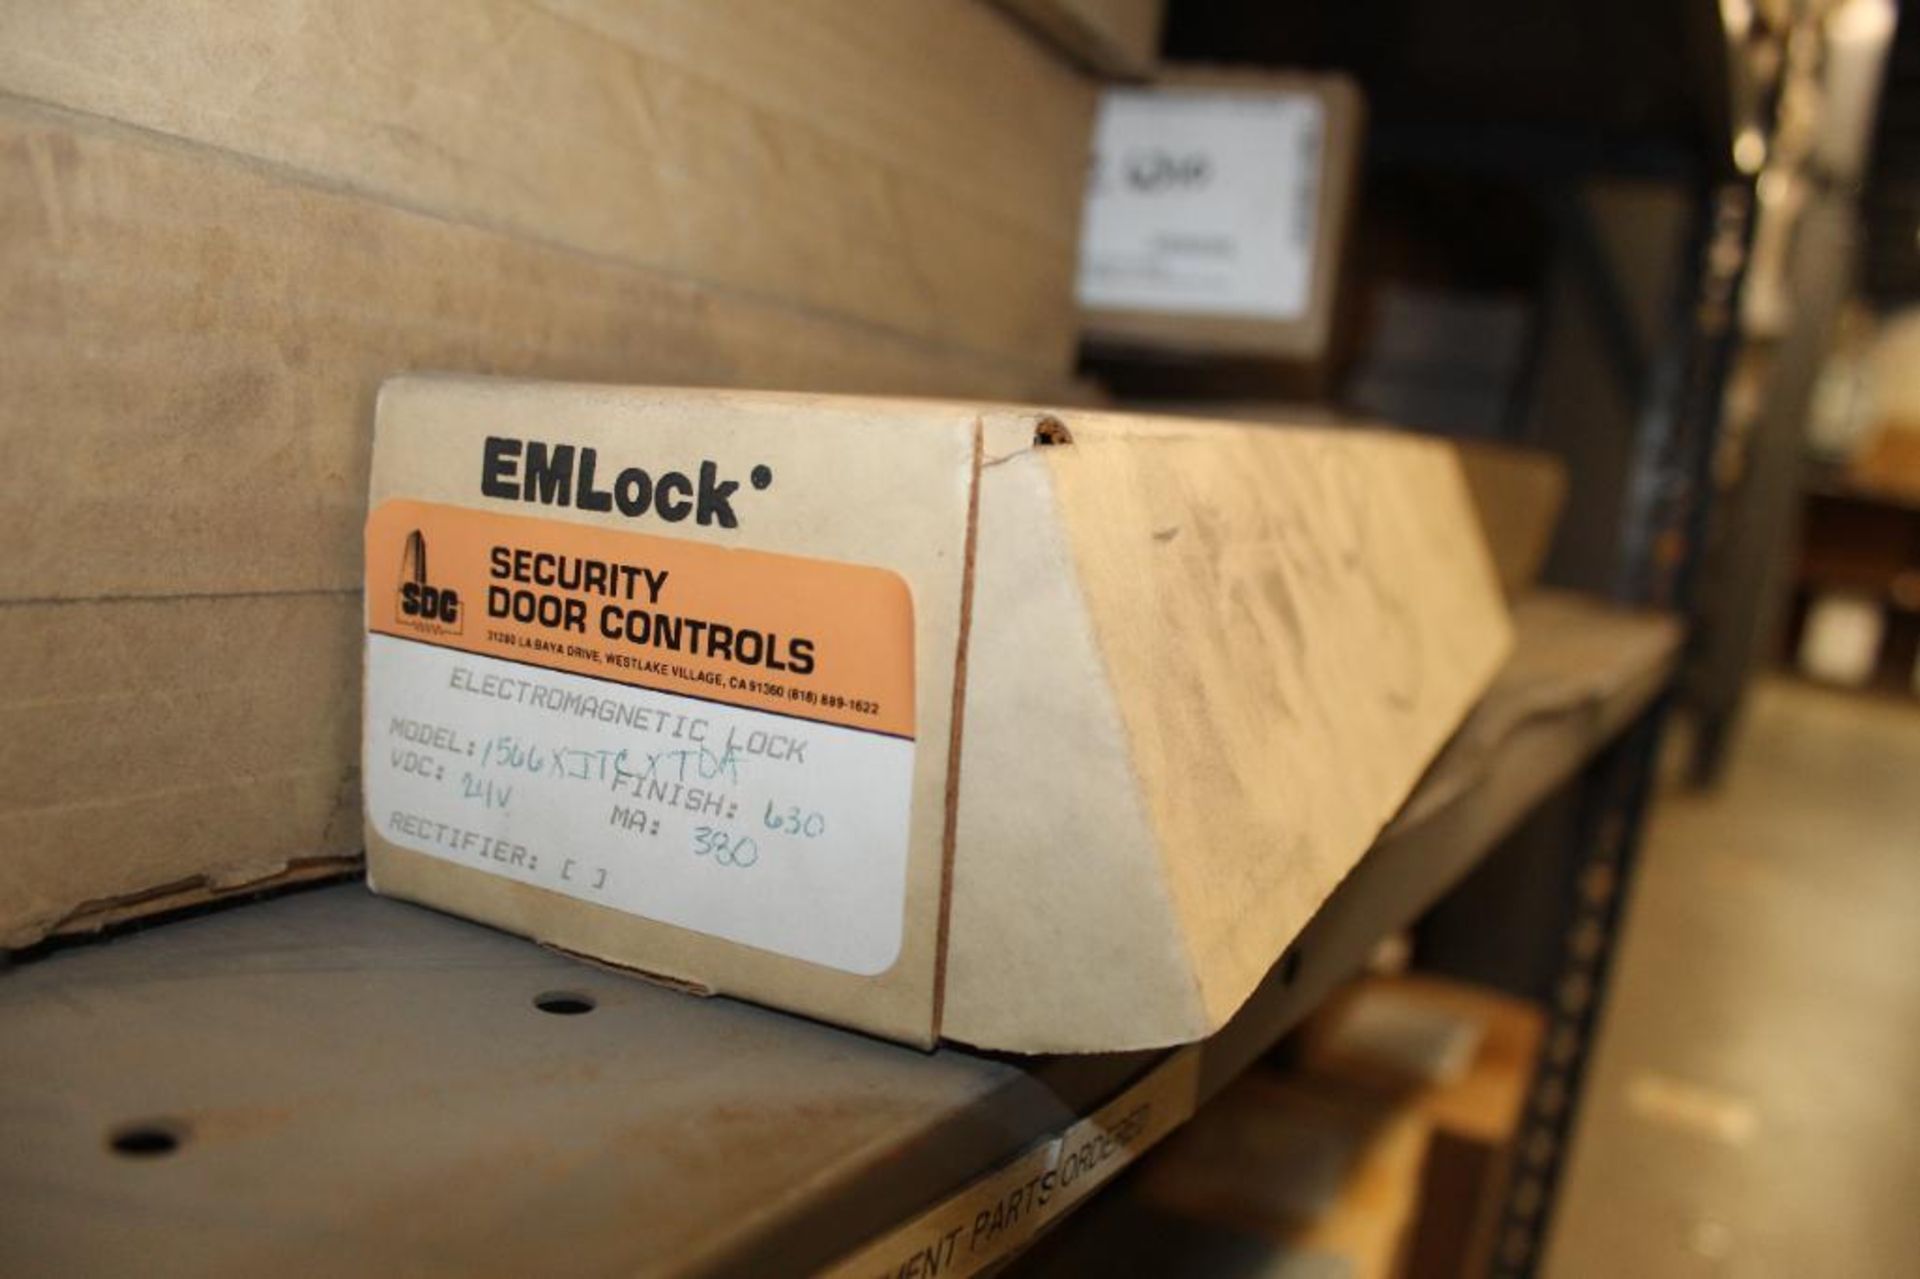 Lot of Locknetics, Schlage, Emlock and Assa Abloy Electromagnetic Locks and Magnets - Image 12 of 13